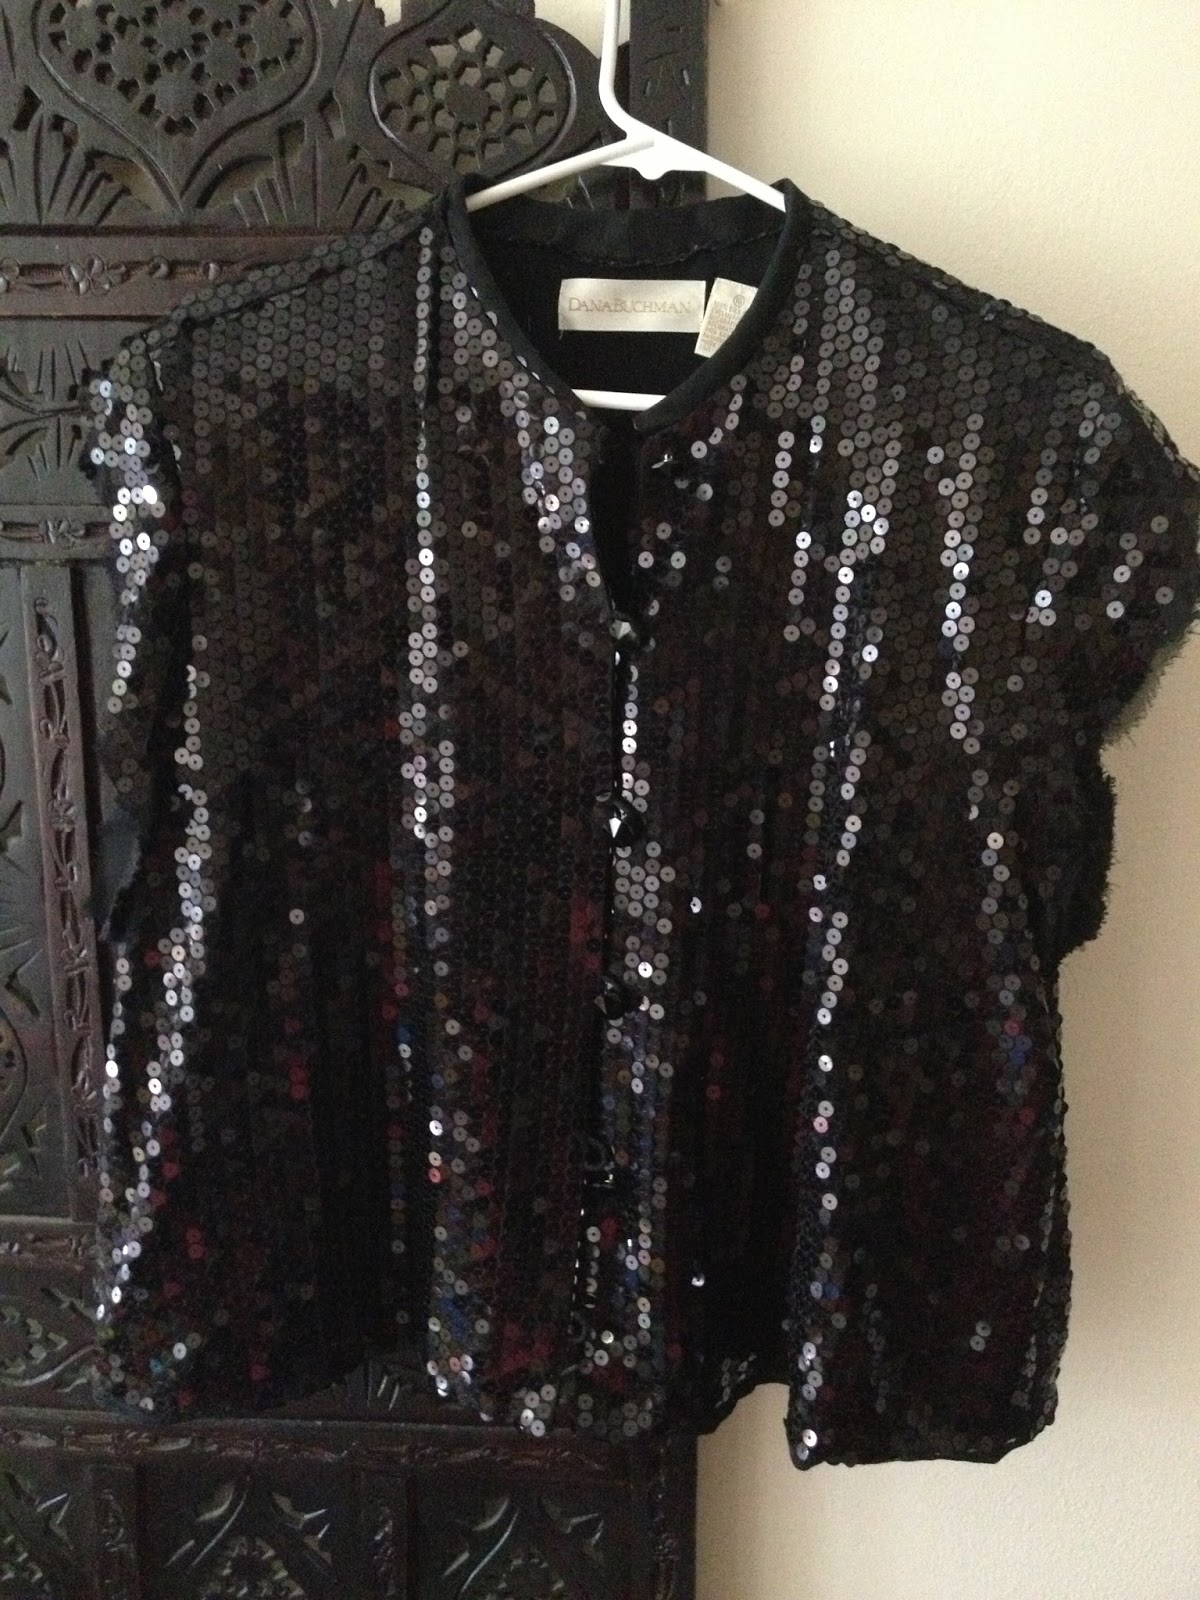 Refashion Co-op: Part 2 of the sequined jacket...